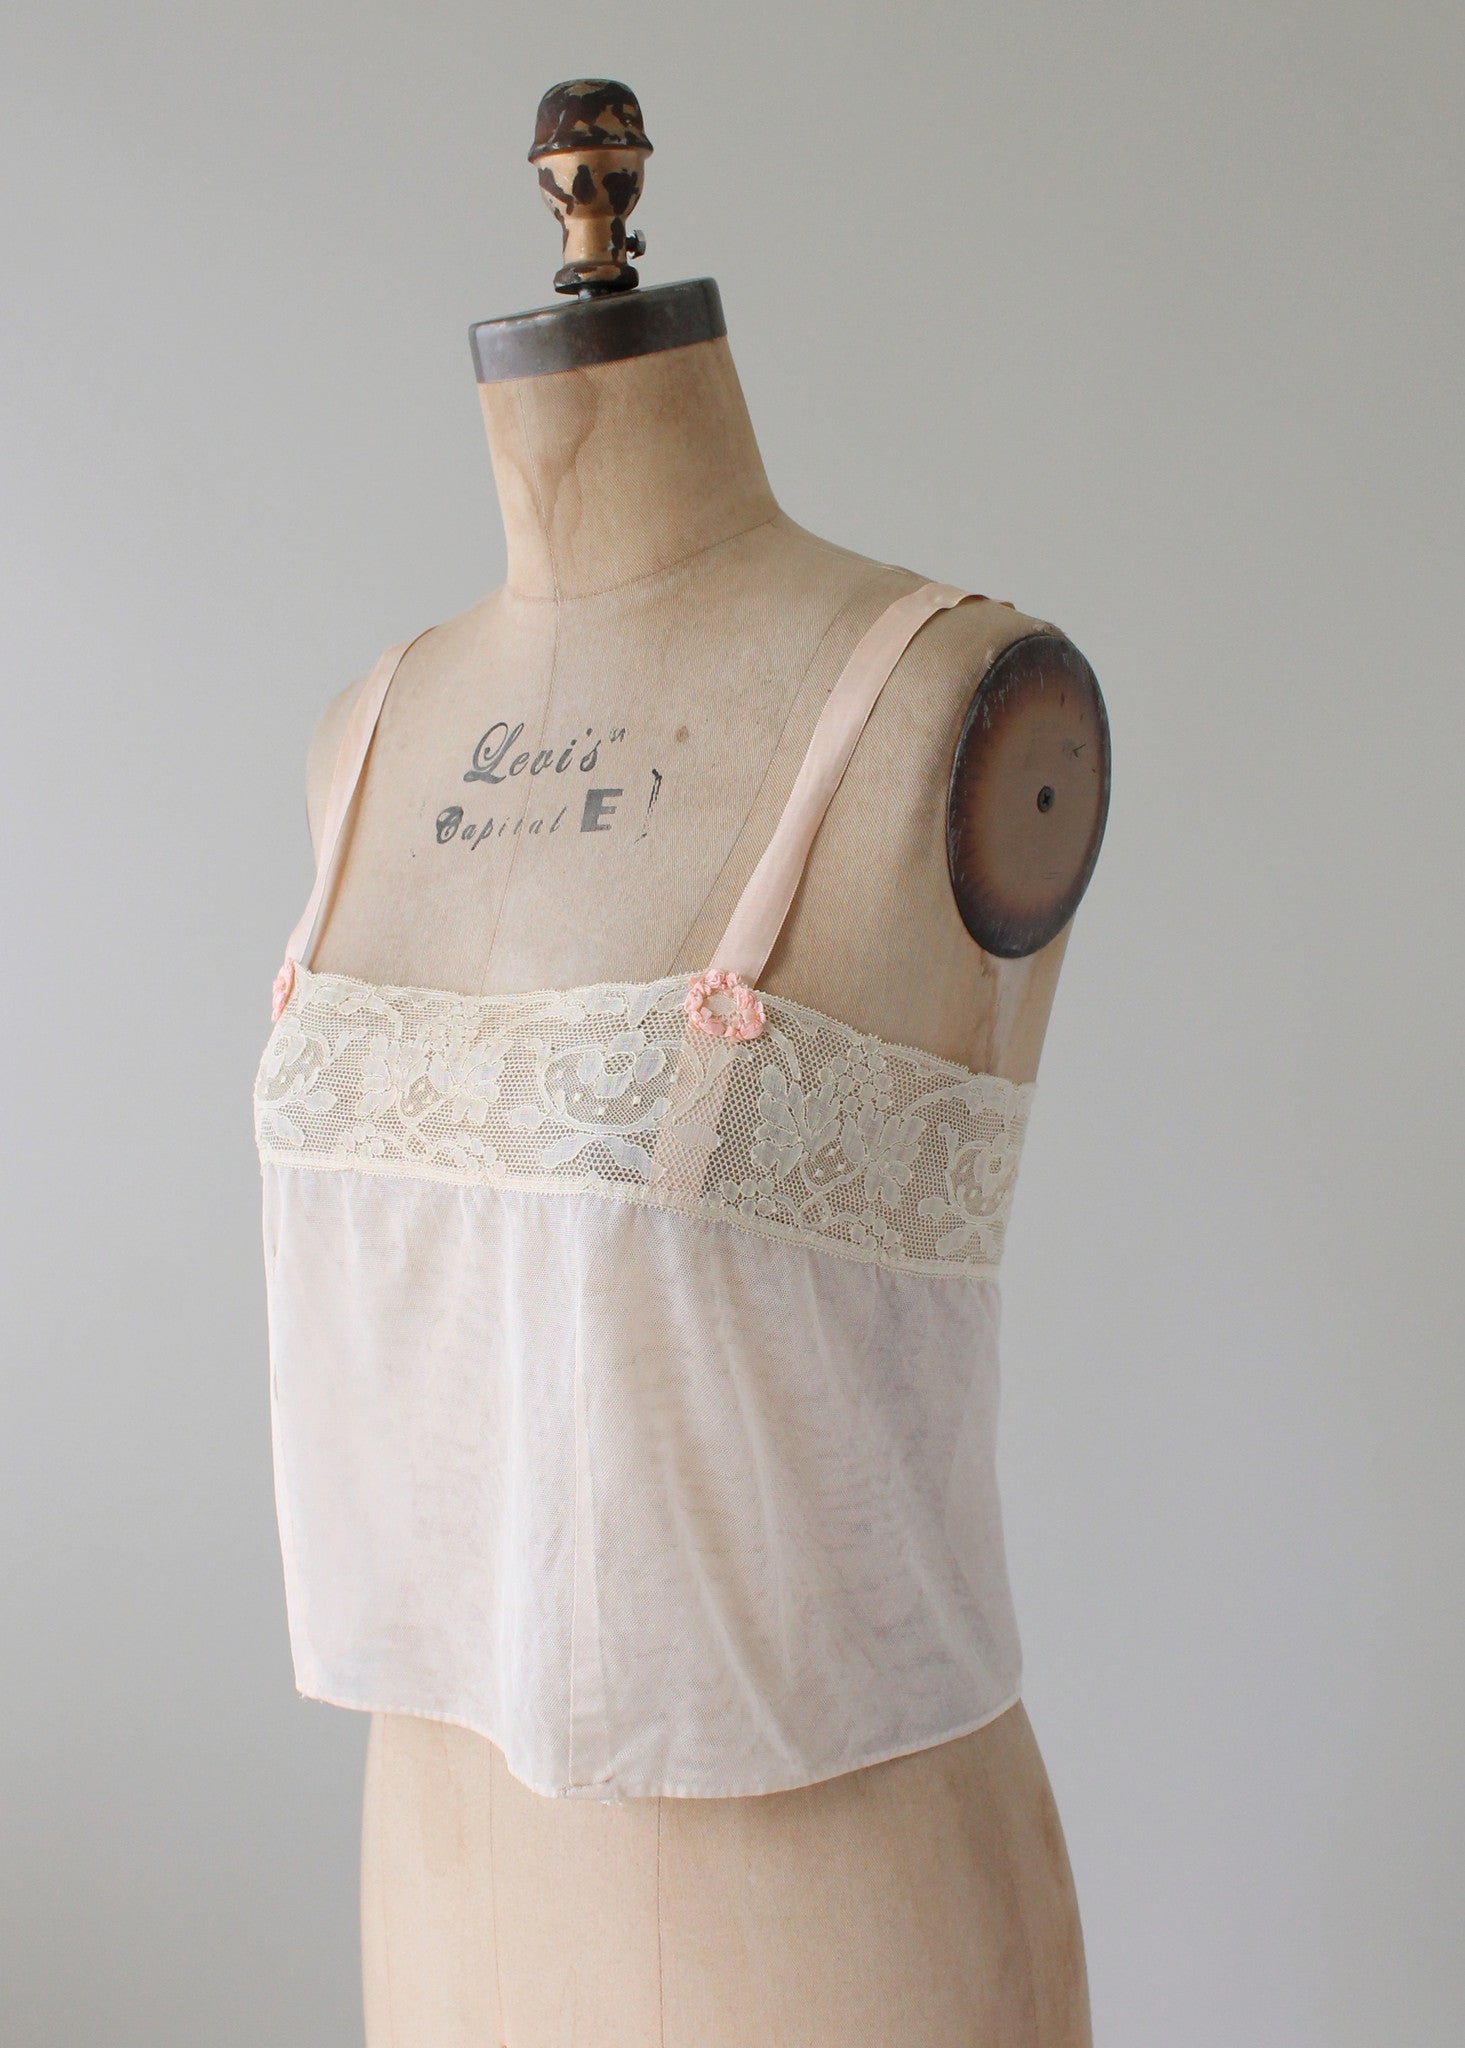 Vintage 1920s French Mesh and Lace Brassiere - Raleigh Vintage